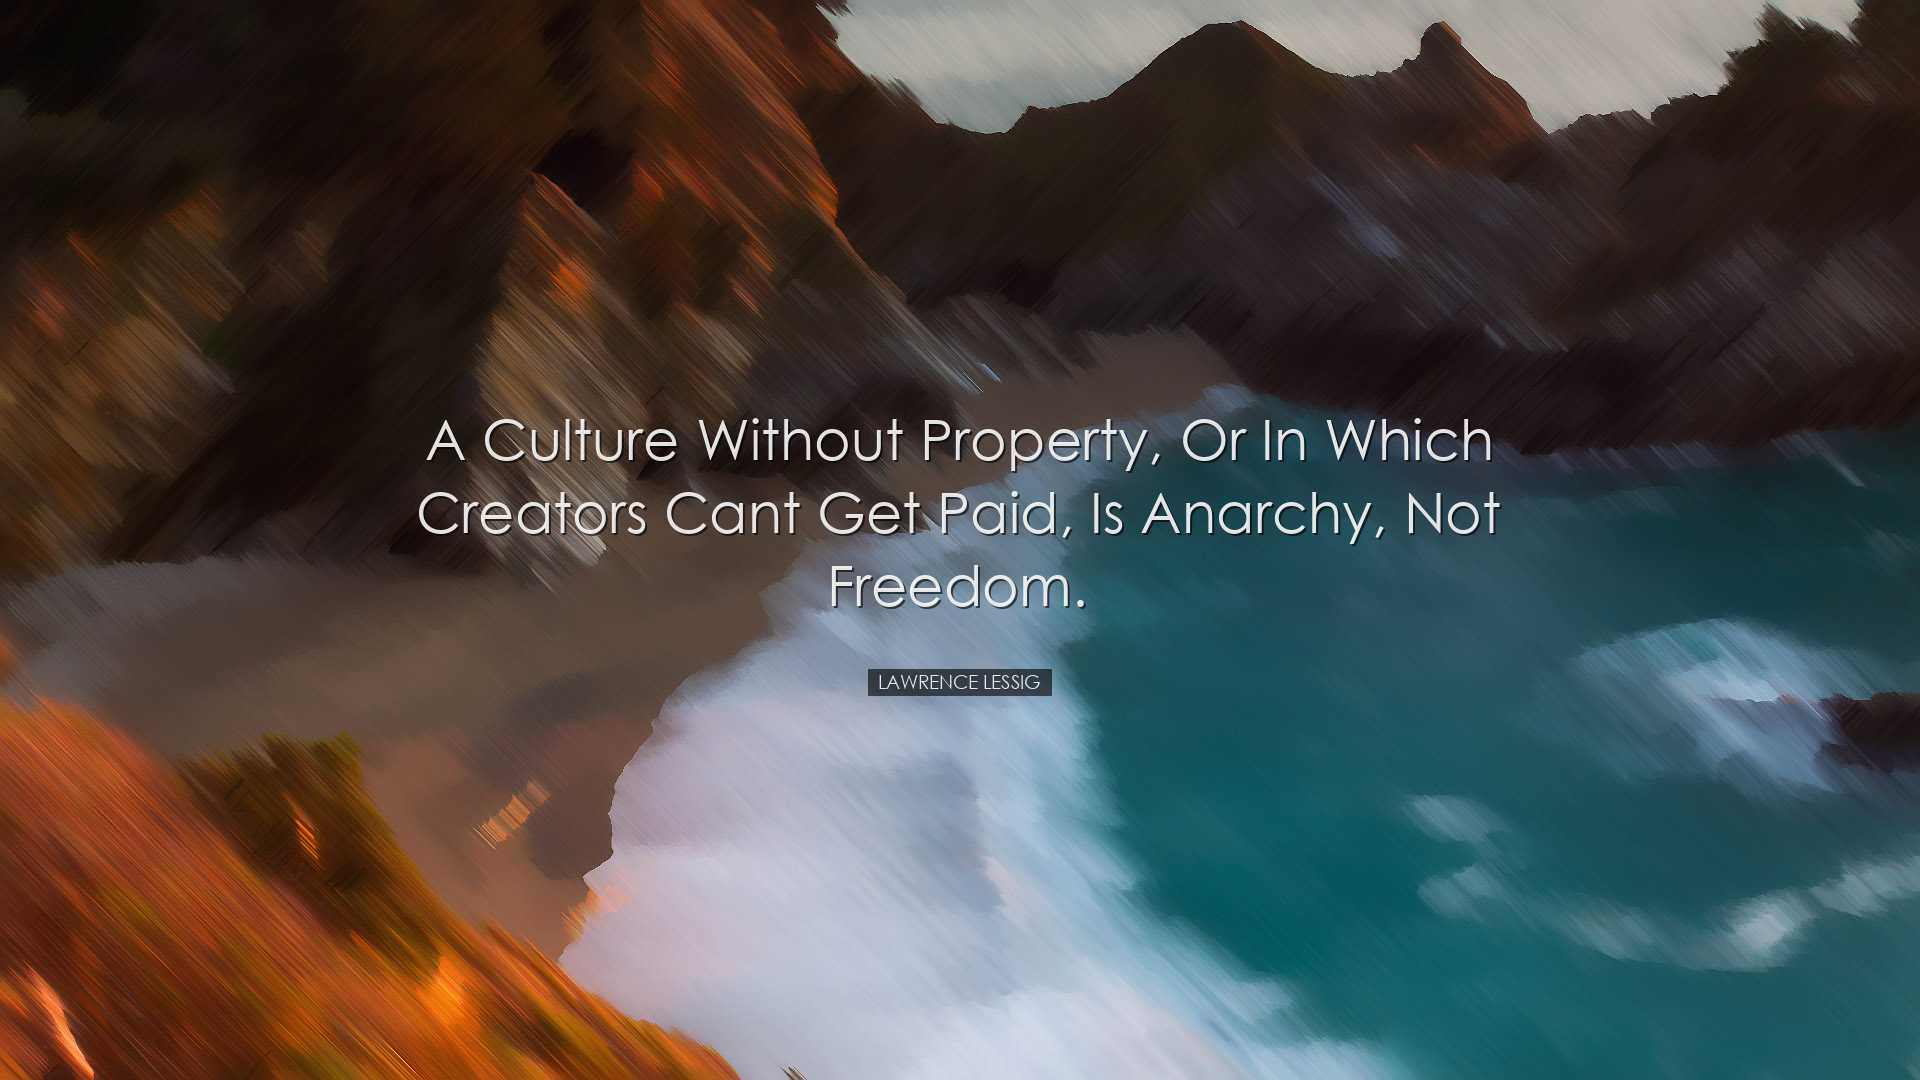 A culture without property, or in which creators cant get paid, is